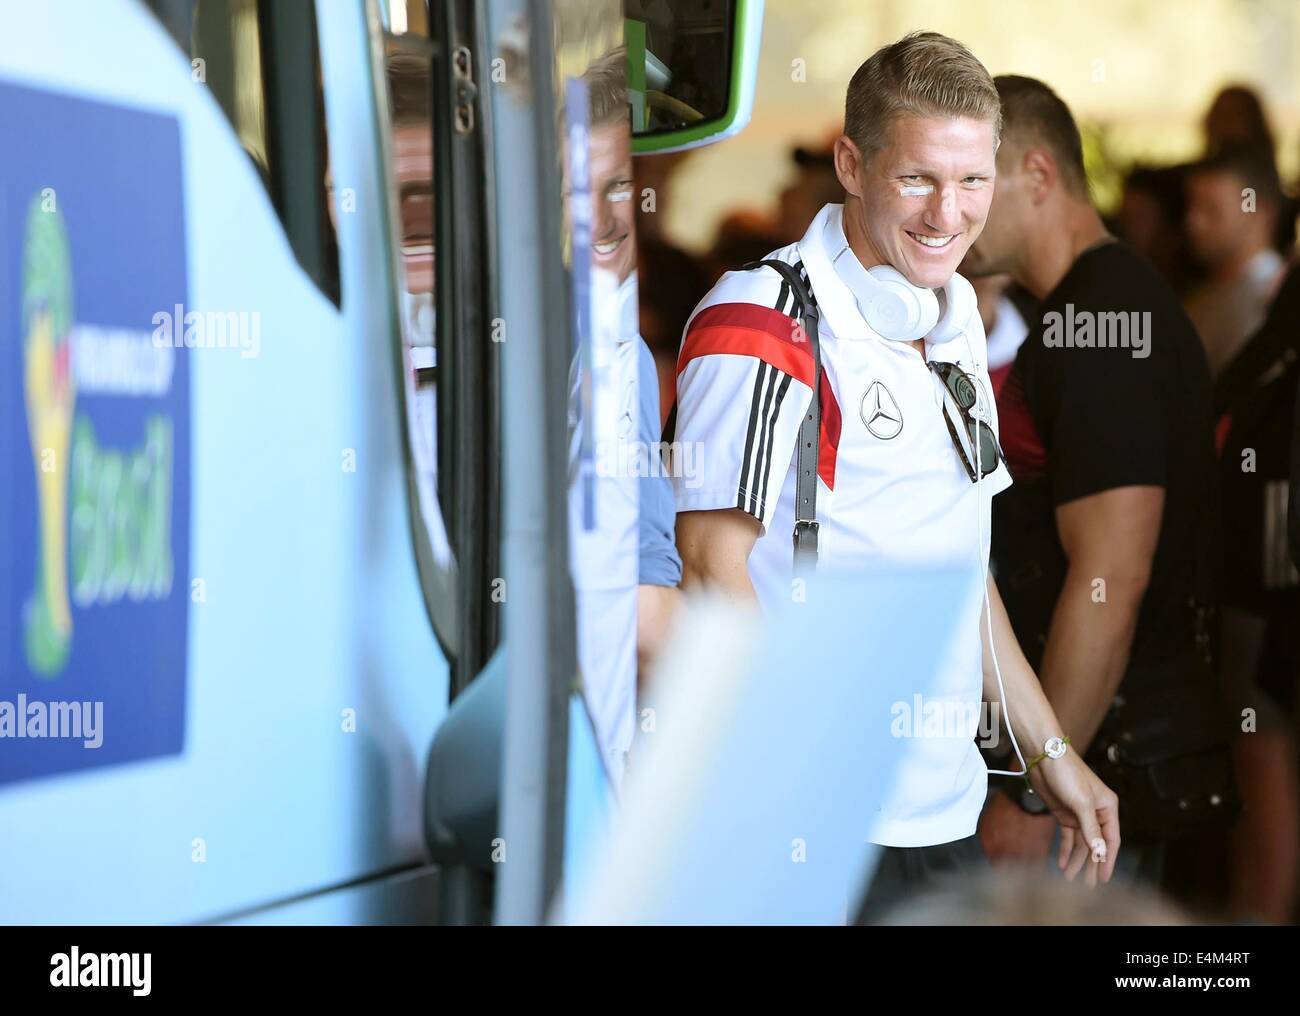 Rio de Janeiro, Brazil. 14th July, 2014. Germany's Bastian Schweinsteiger leaves the Sheraton Rio Hotel & Resort in Rio de Janeiro, Brazil, 14 July 2014. The German national soccer team will depart from Rio airport for Berlin to return home to Germany later today. Photo: Marcus Brandt/dpa/Alamy Live News Stock Photo